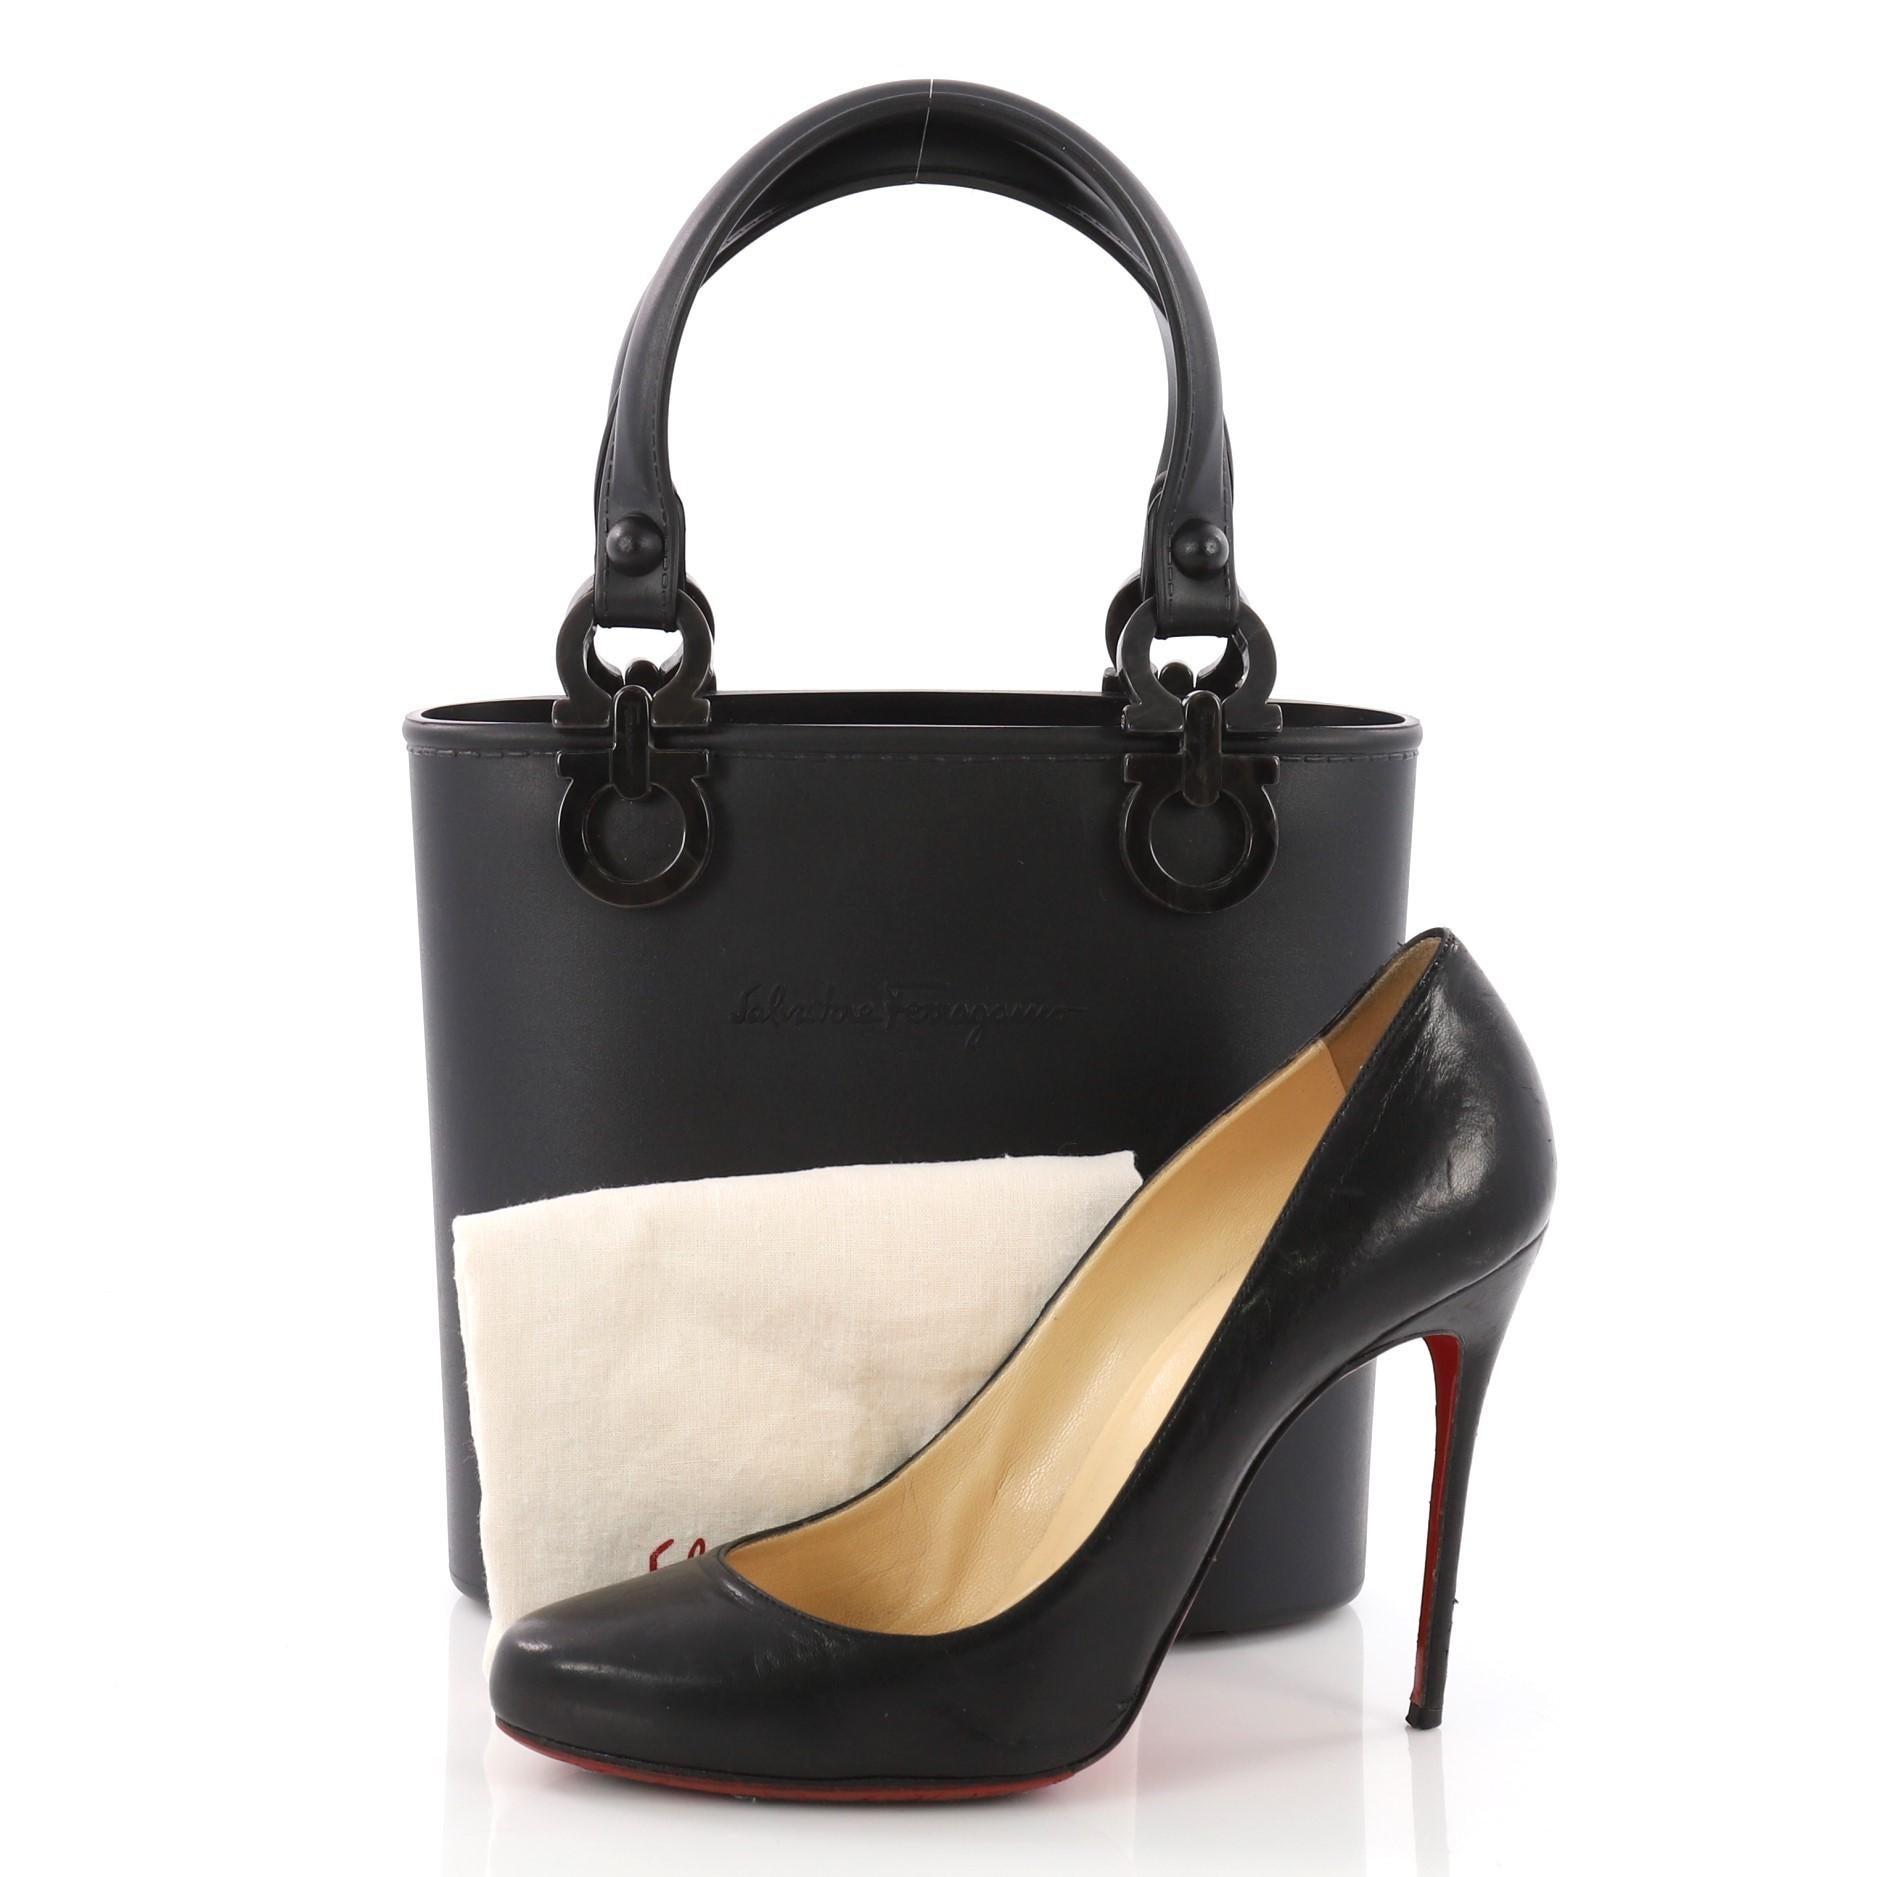 This Salvatore Ferragamo Vintage Gancini Top Handle Bag Rubber Small, crafted from black rubber, features dual flat handles, Gancini accents, and multicolored and silver hardware-tone hardware. It opens to a black rubber interior. **Note: Shoe